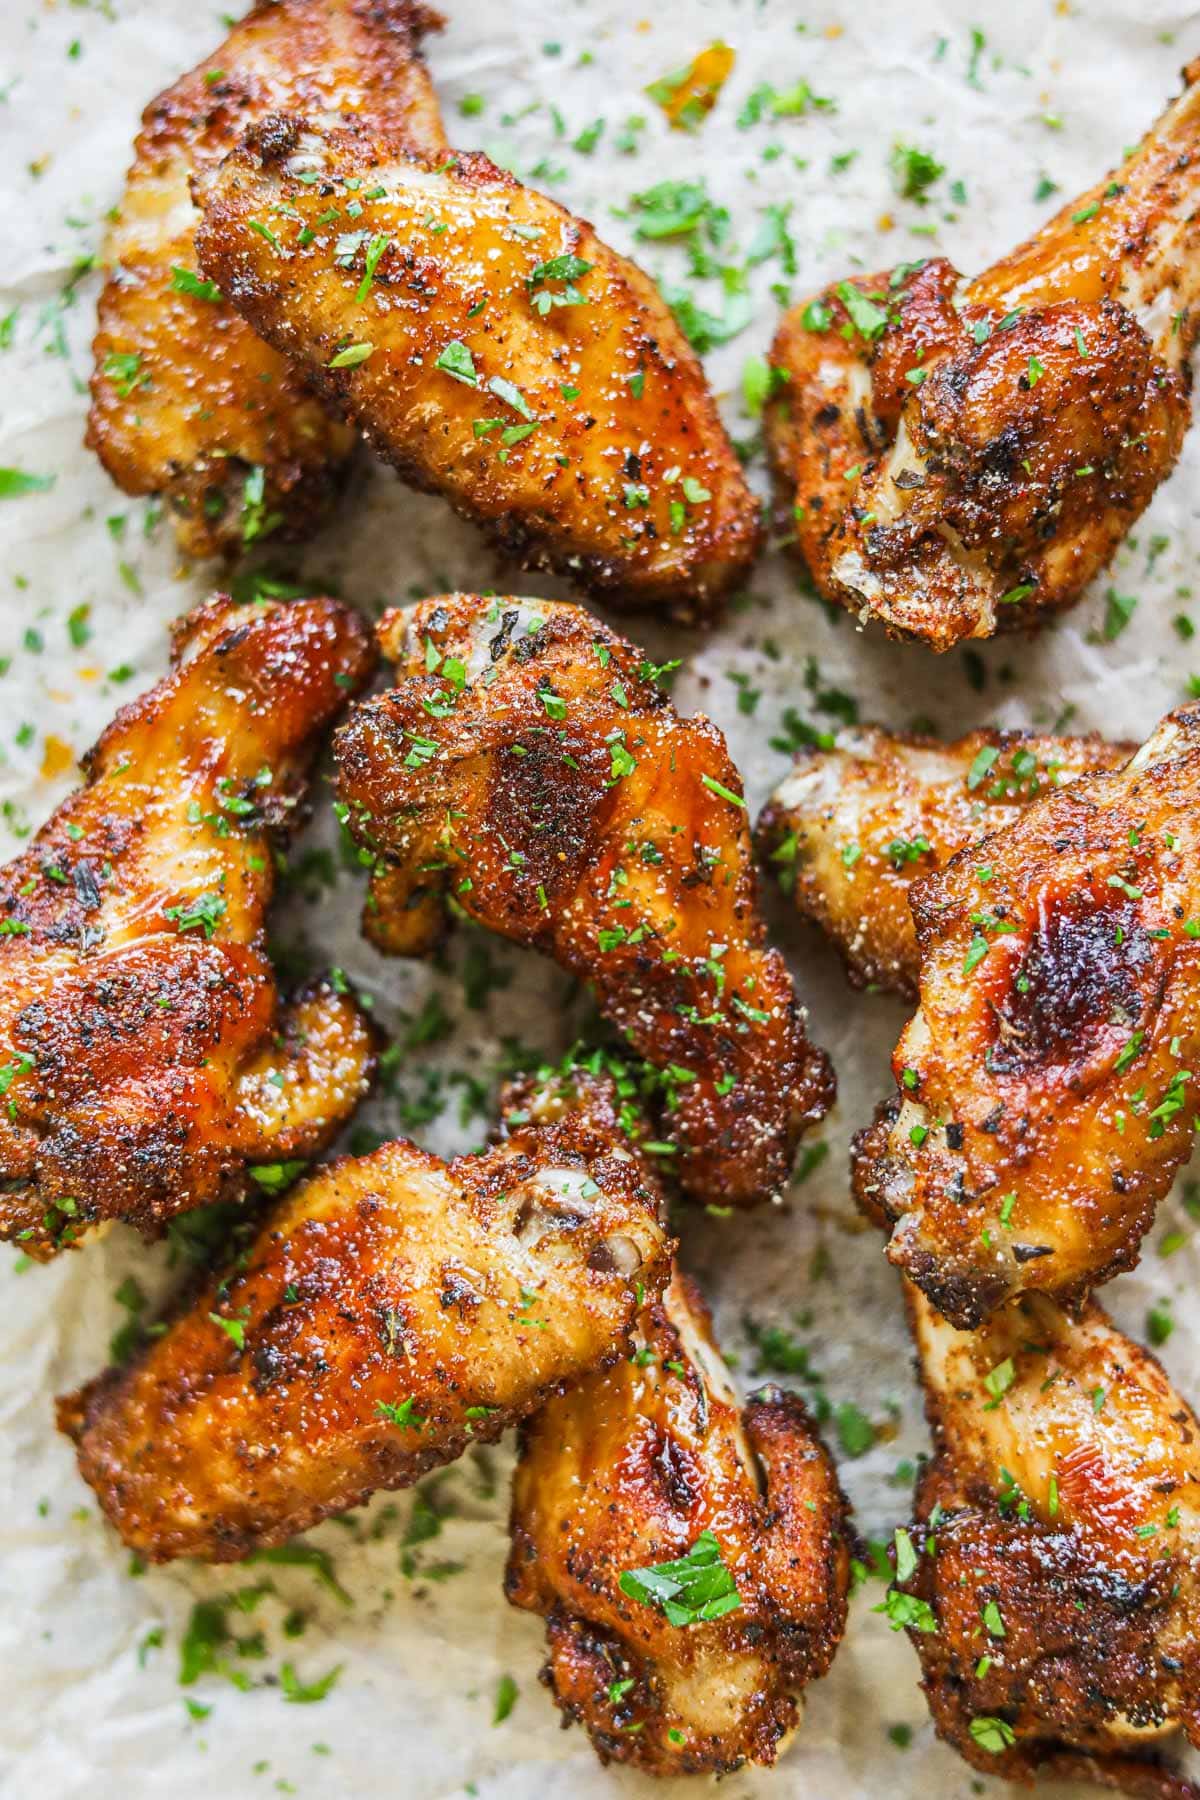 Baked dry rub chicken wings made with a brown sugar rub topped with finely chopped parsley on a sheet of parchment paper.